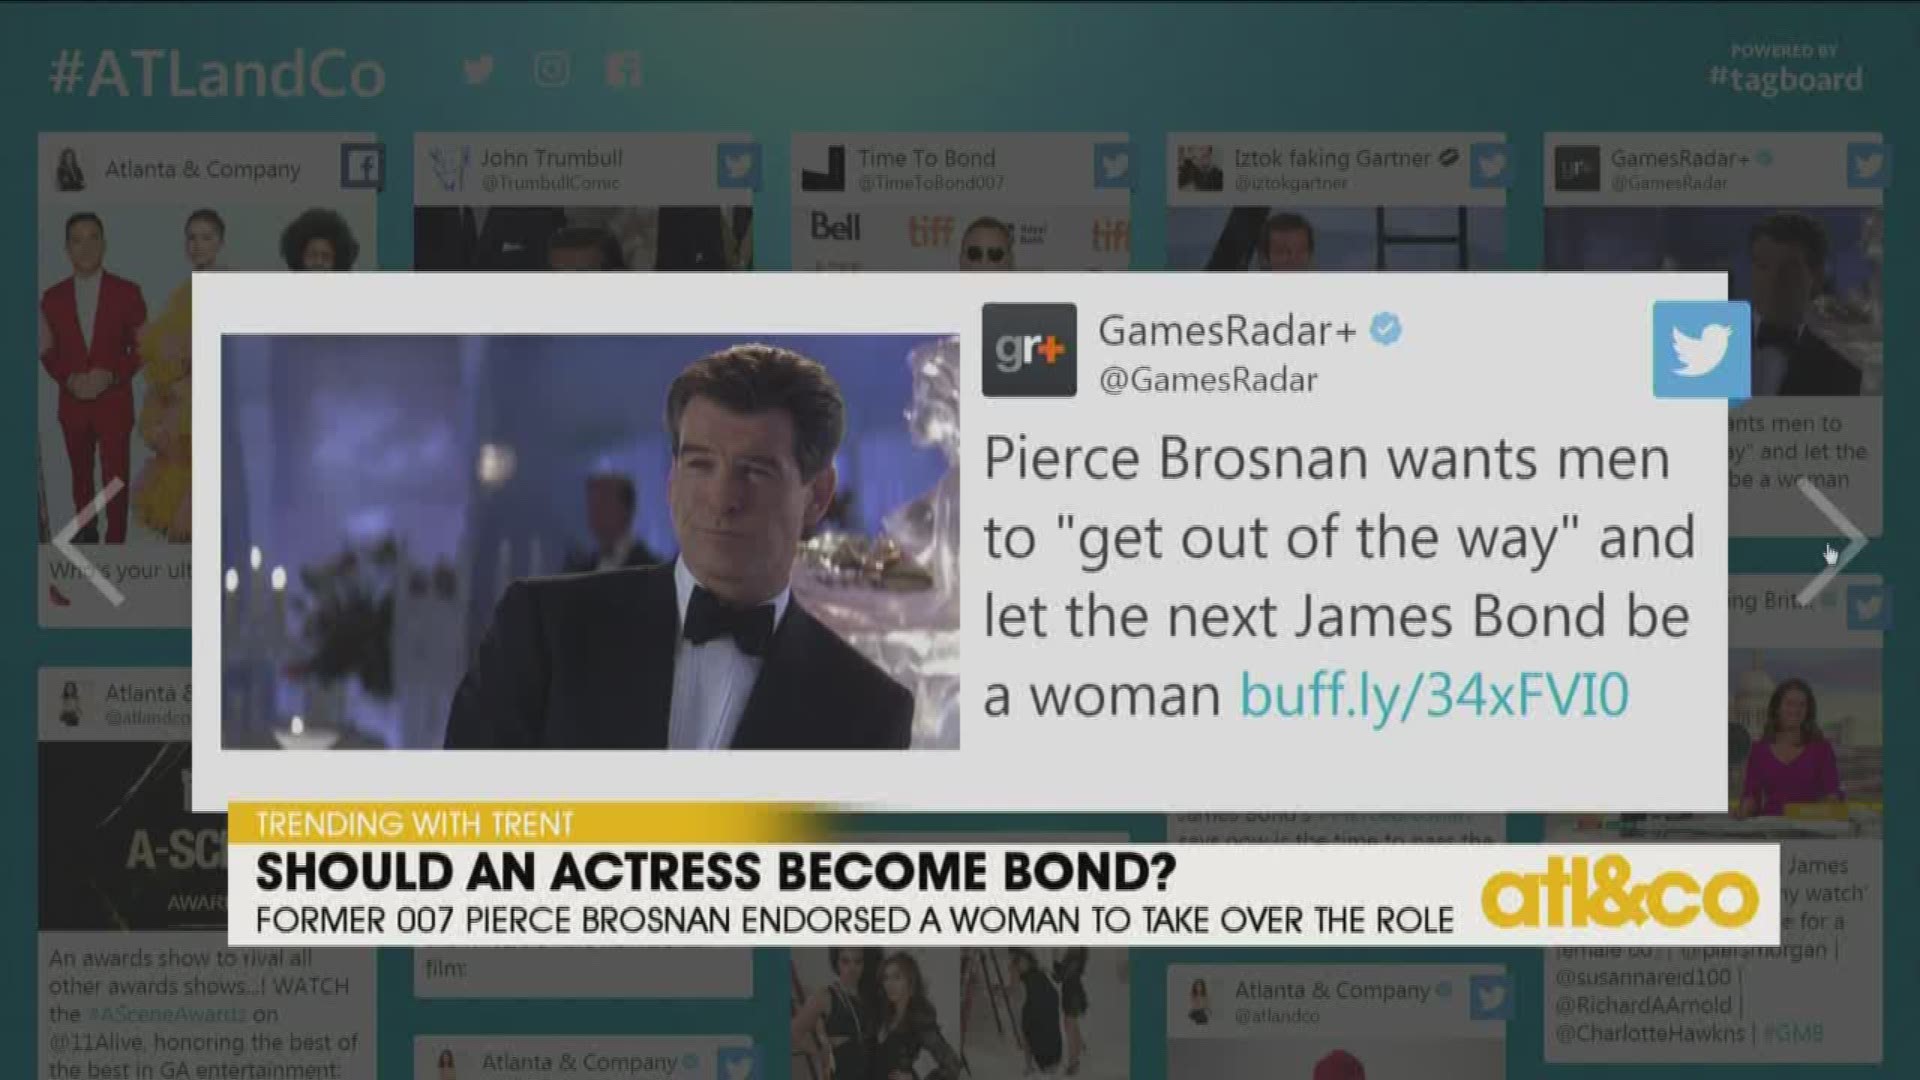 James Bond alum Pierce Brosnan threw his support behind a female casting to helm the franchise.